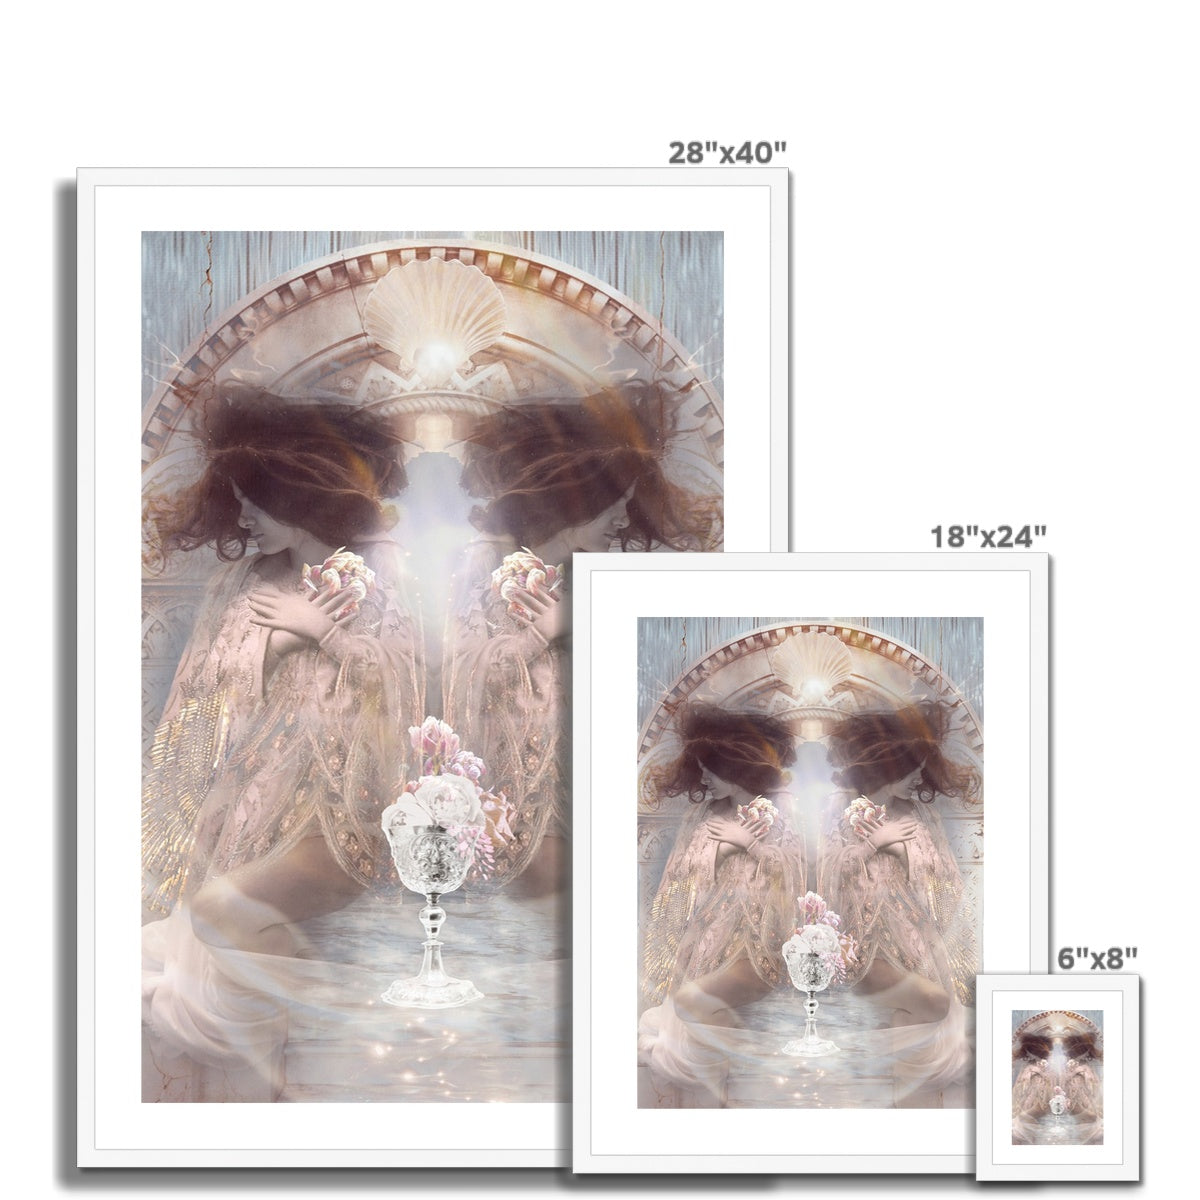 Aphrodite Framed & Mounted Print - Starseed Designs Inc.